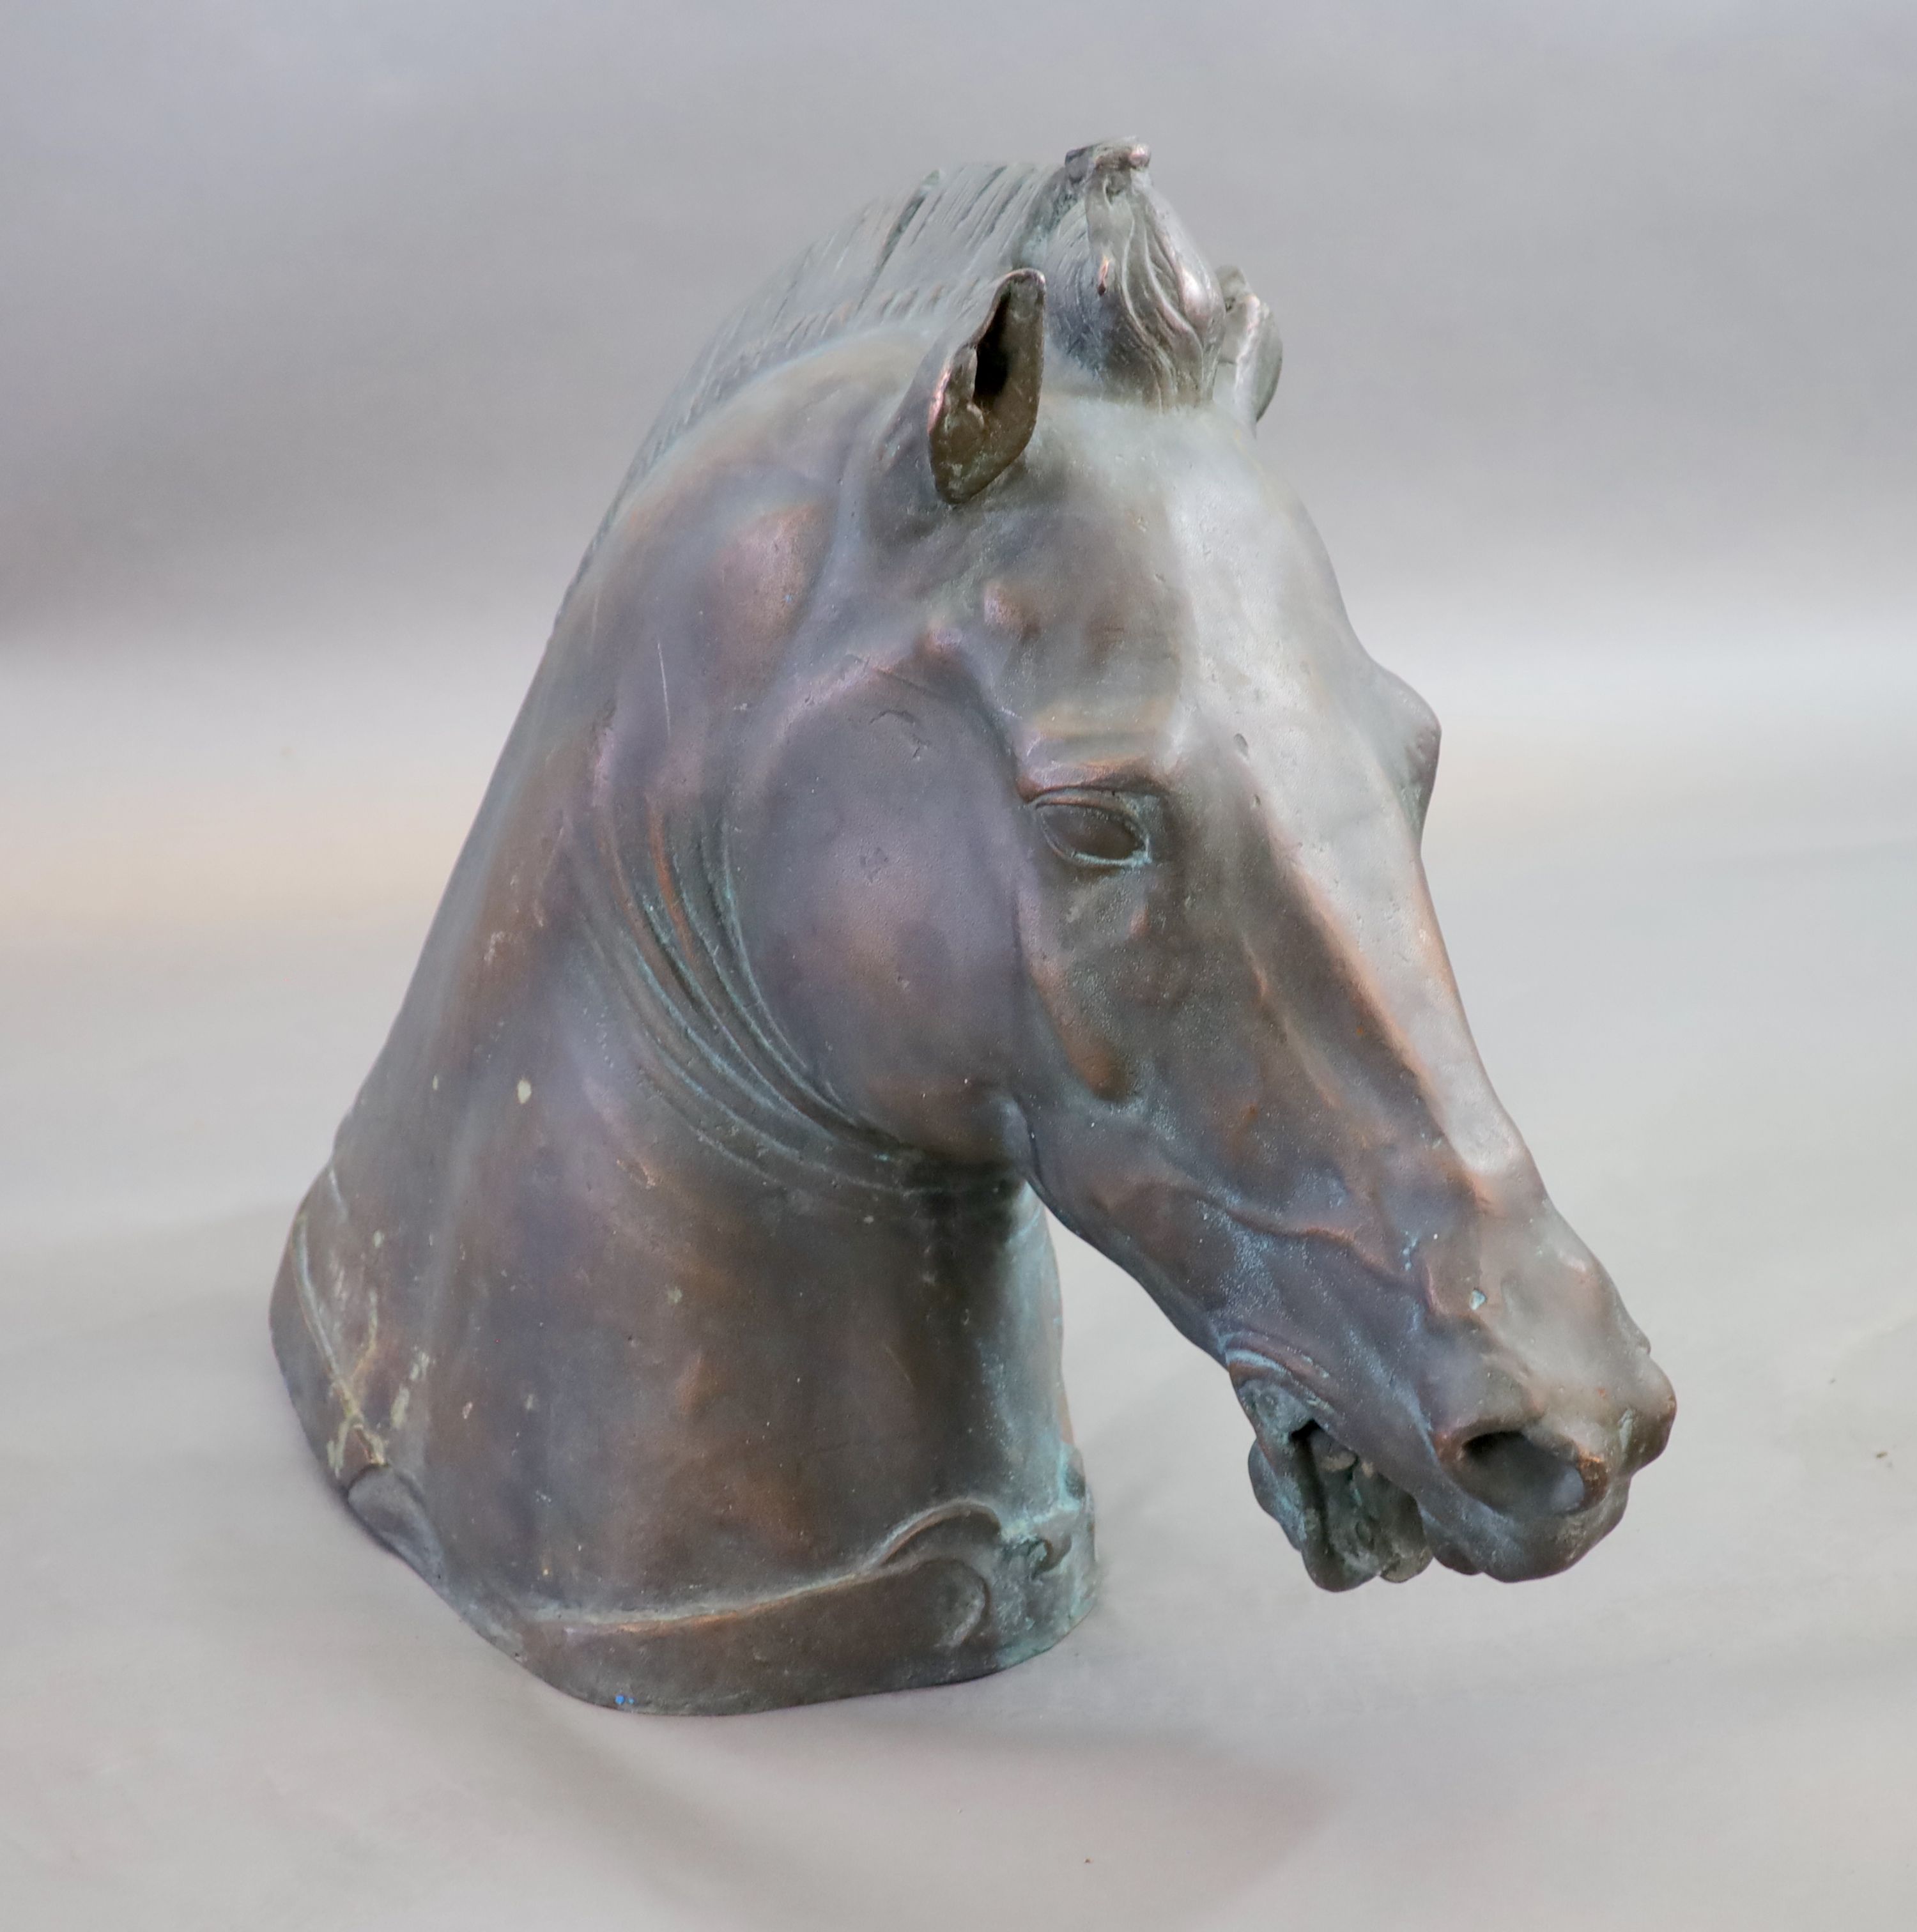 A large and impressive life-size bronze model after the Medici Riccardi horse’s head, 20th